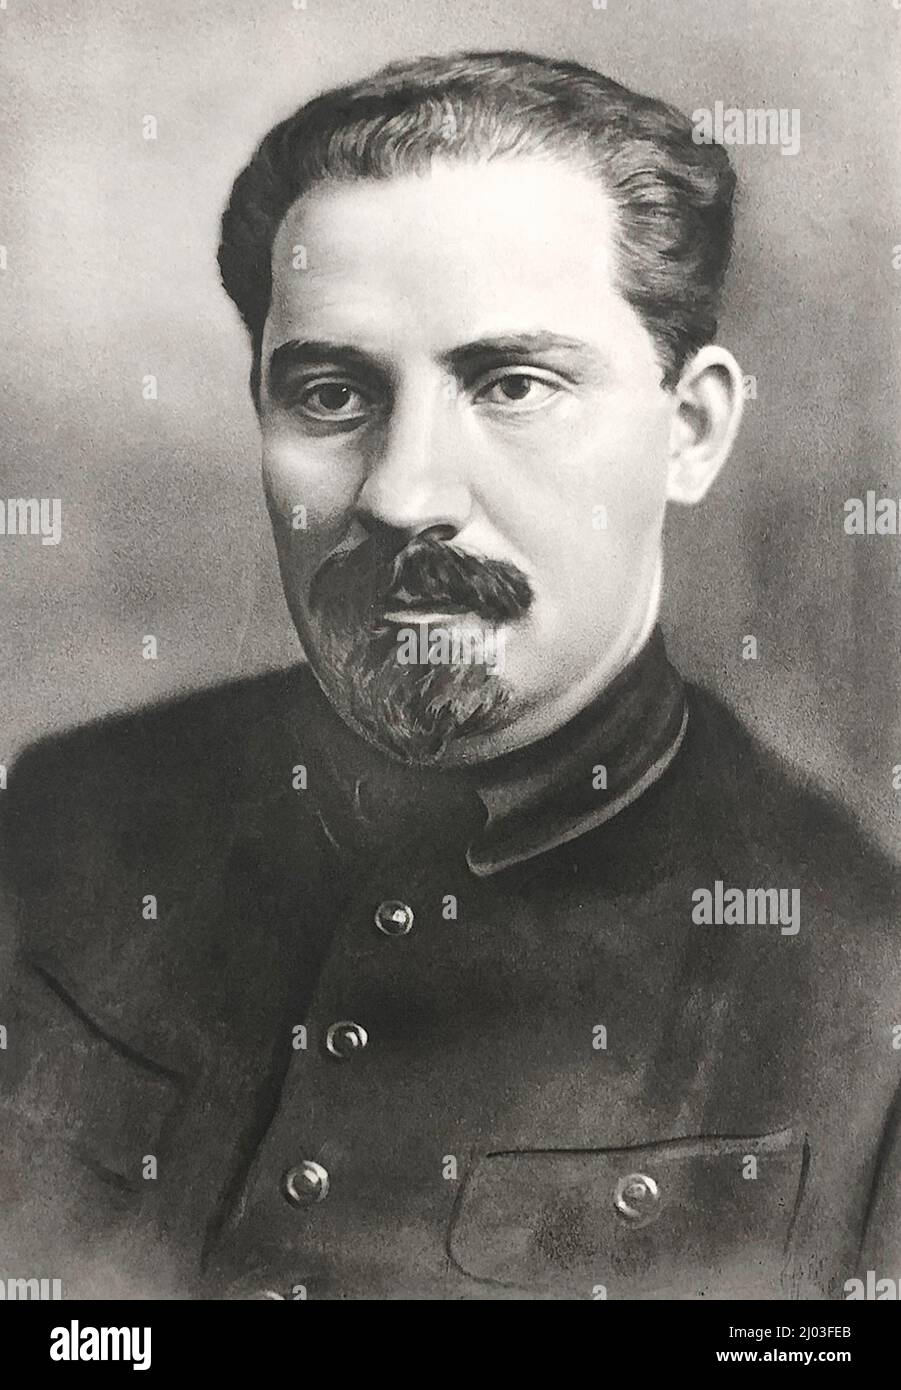 Lazar Moiseyevich Kaganovich, also Kahanovich (1893 – 1991), was a Soviet politician and administrator, and one of the main associates of Joseph Stalin. He is known for helping Stalin come to power and for his harsh treatment and execution of those deemed threats to Stalin's regime. Stock Photo